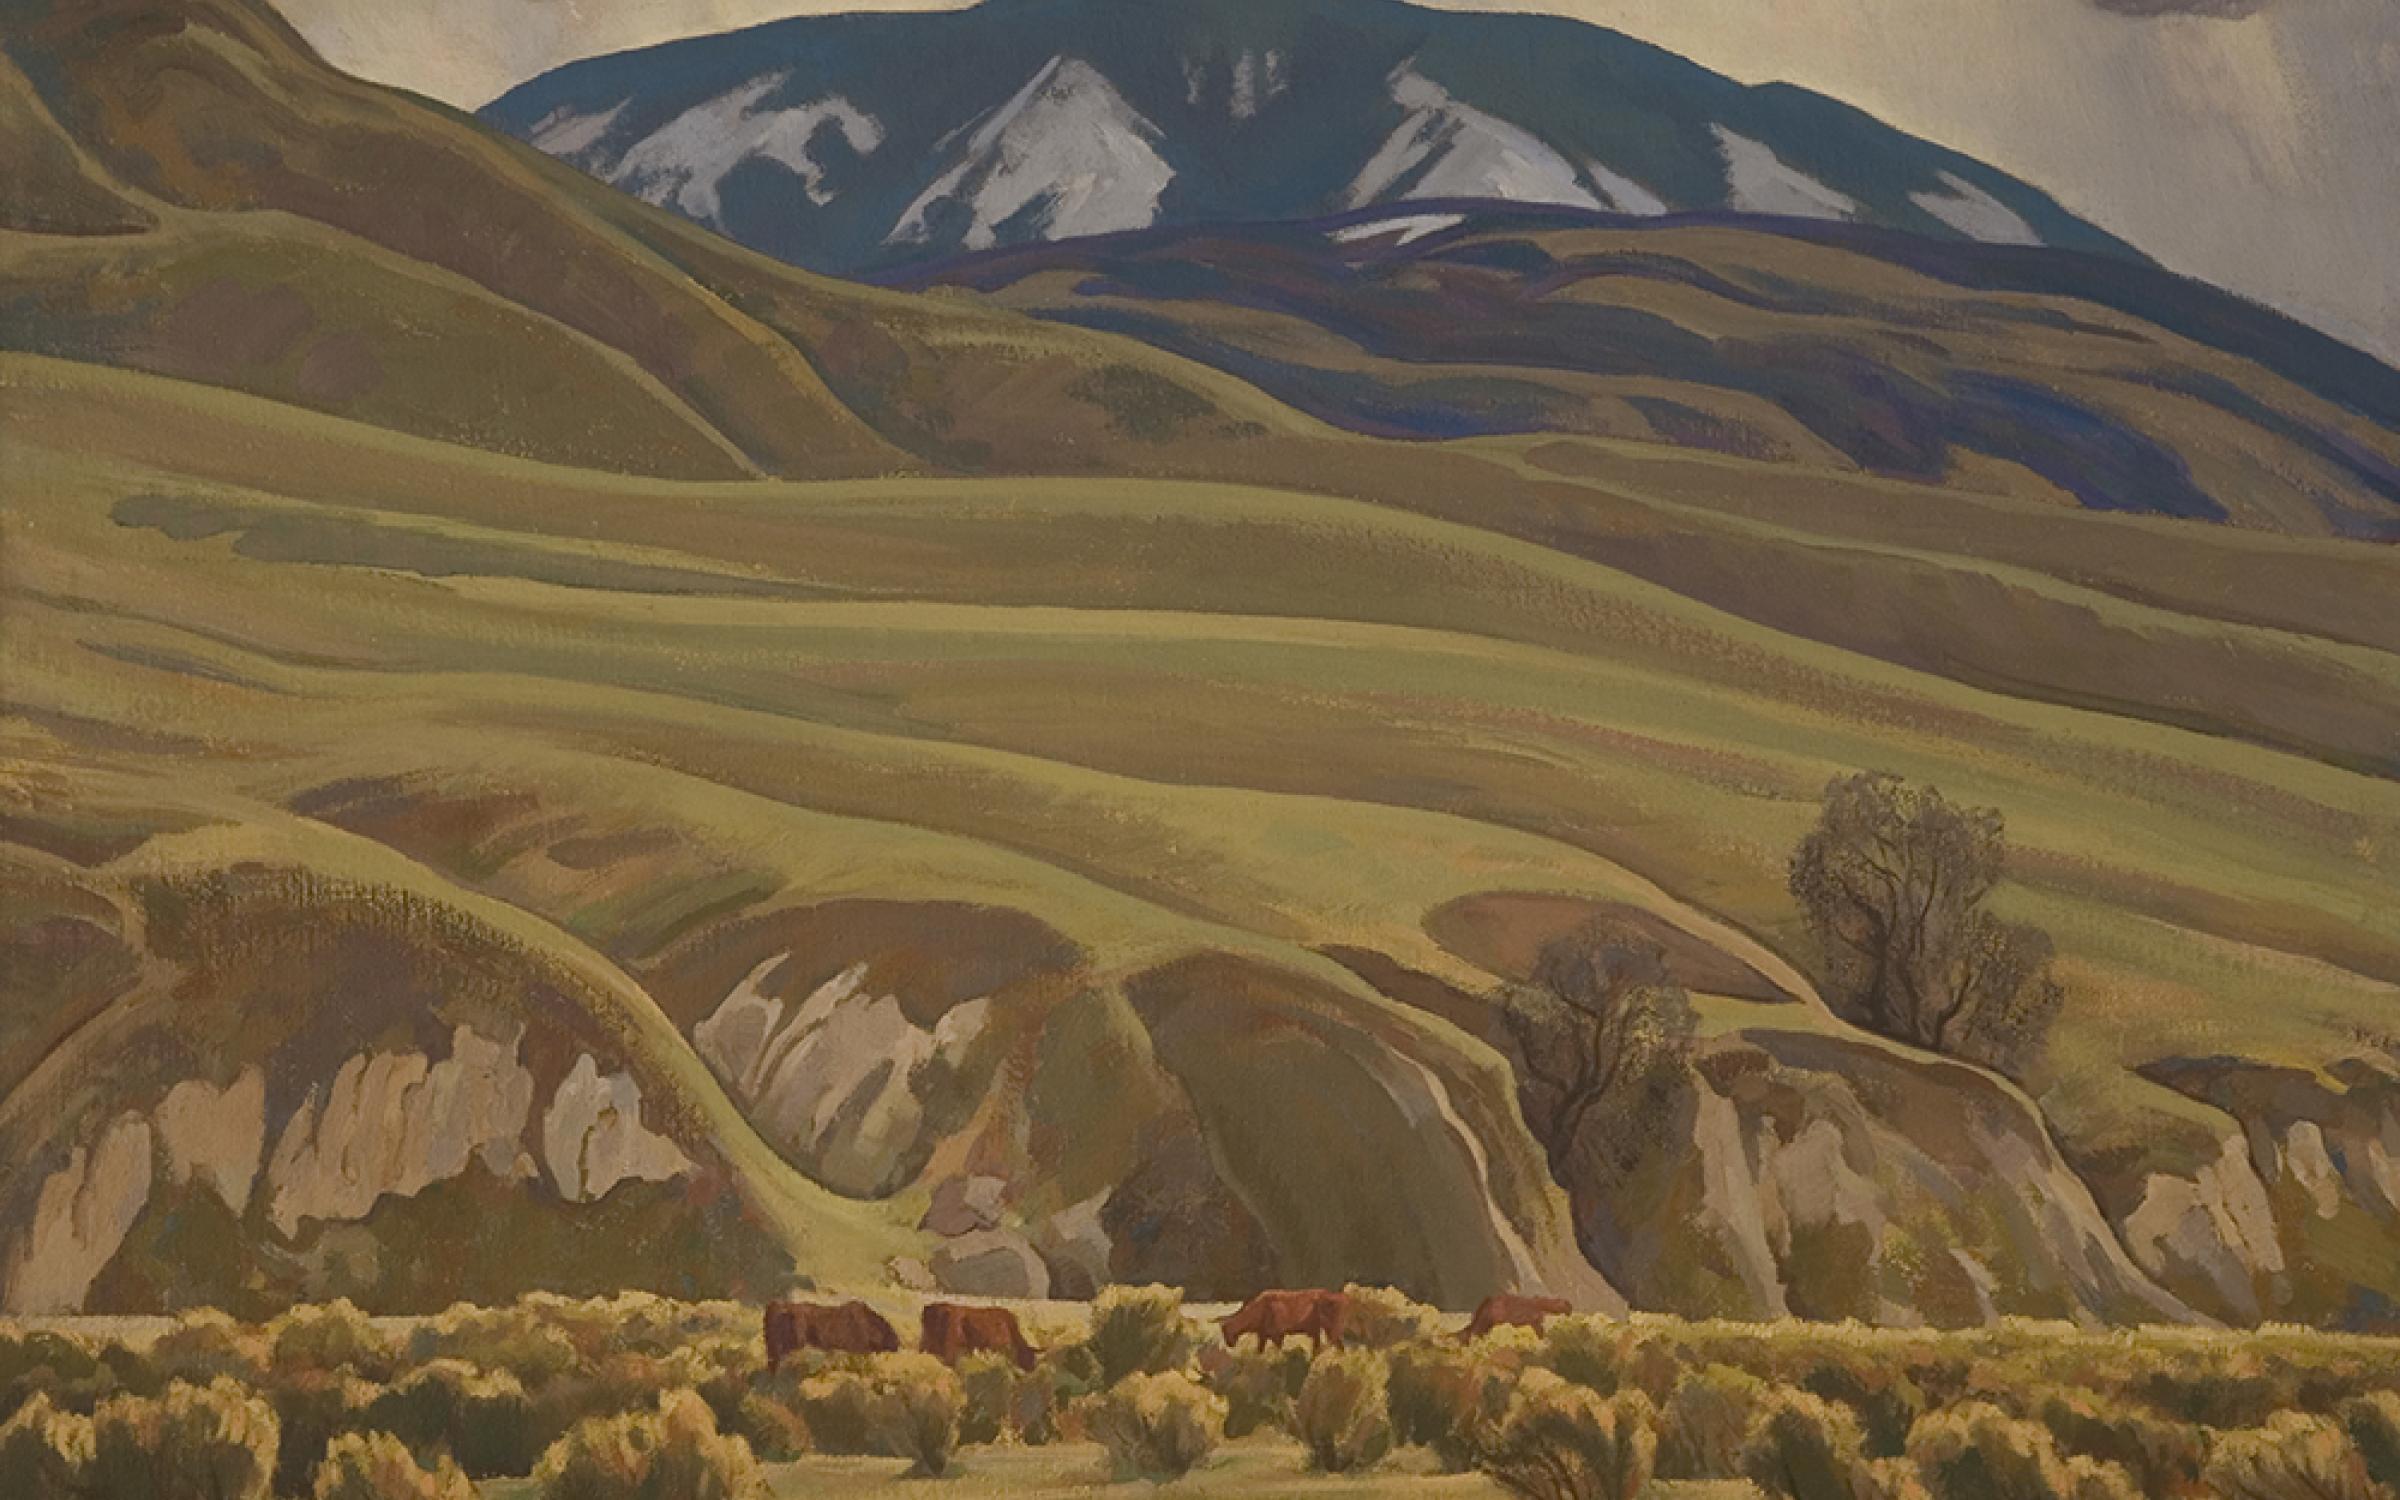 Maynard Dixon (1875-1946), American  Springtime on Bear Mountain, 1930, Oil on canvas, Gift of Mr. and Mrs. Alan B. Blood, framed with funds from the Ann K. Stewart Docent and Volunteer Conservation Fund, UMFA1996.54.1